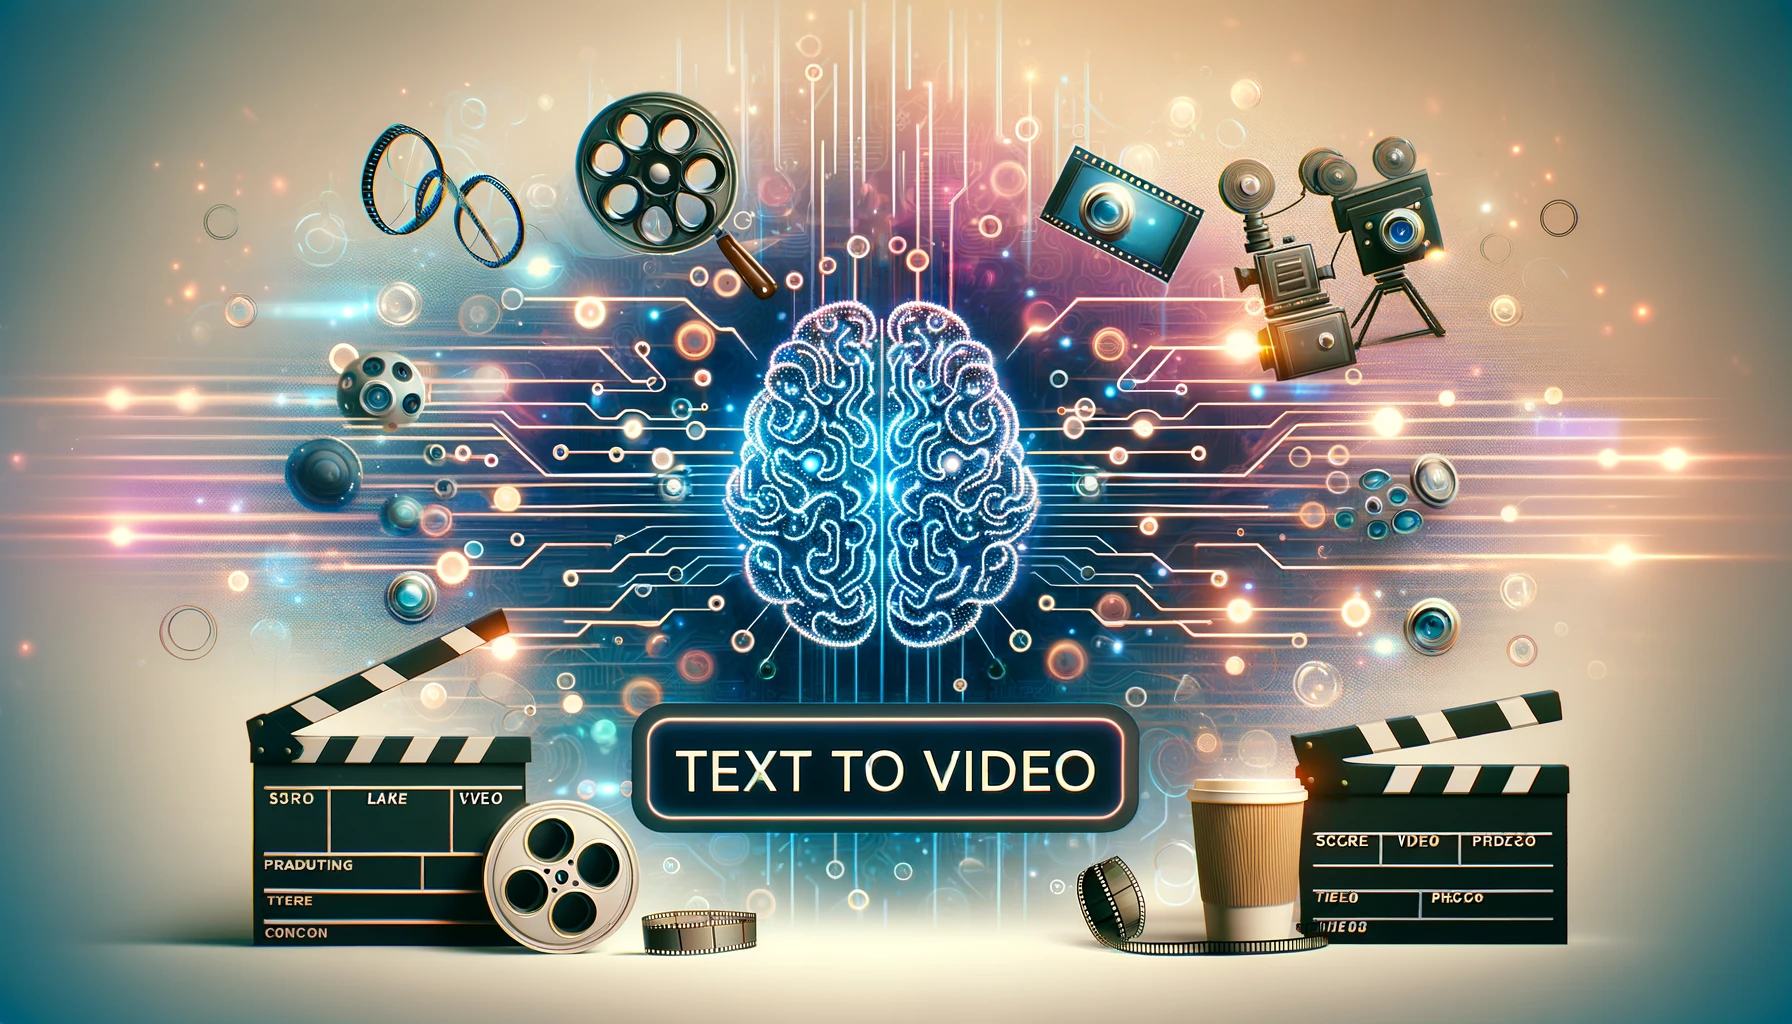 Text to Video AI